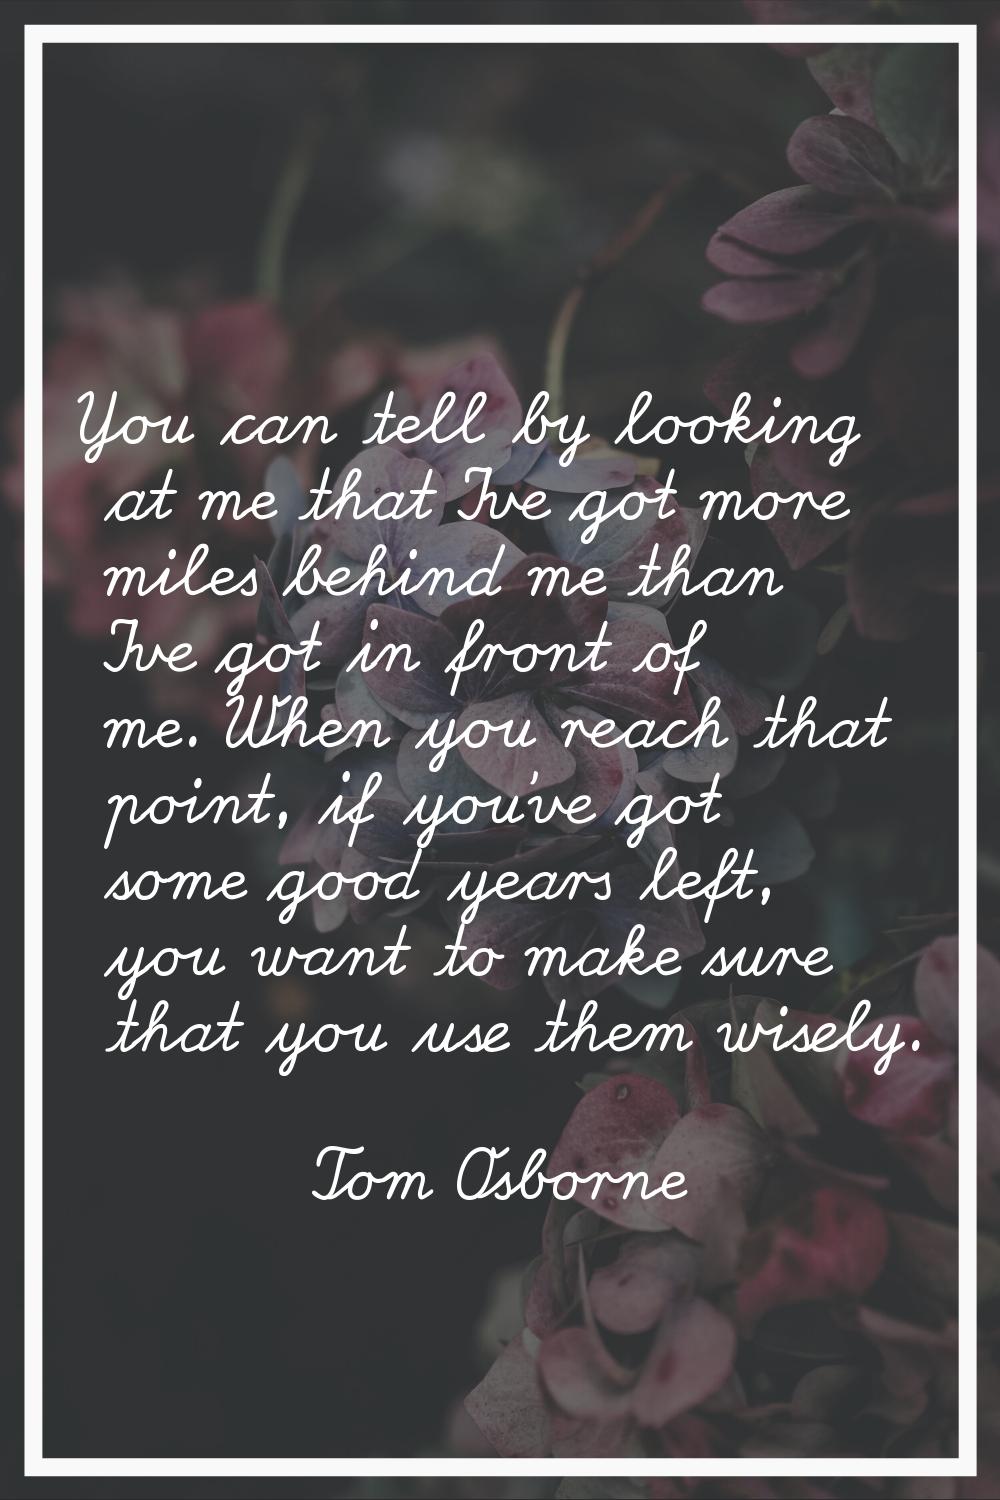 You can tell by looking at me that I've got more miles behind me than I've got in front of me. When